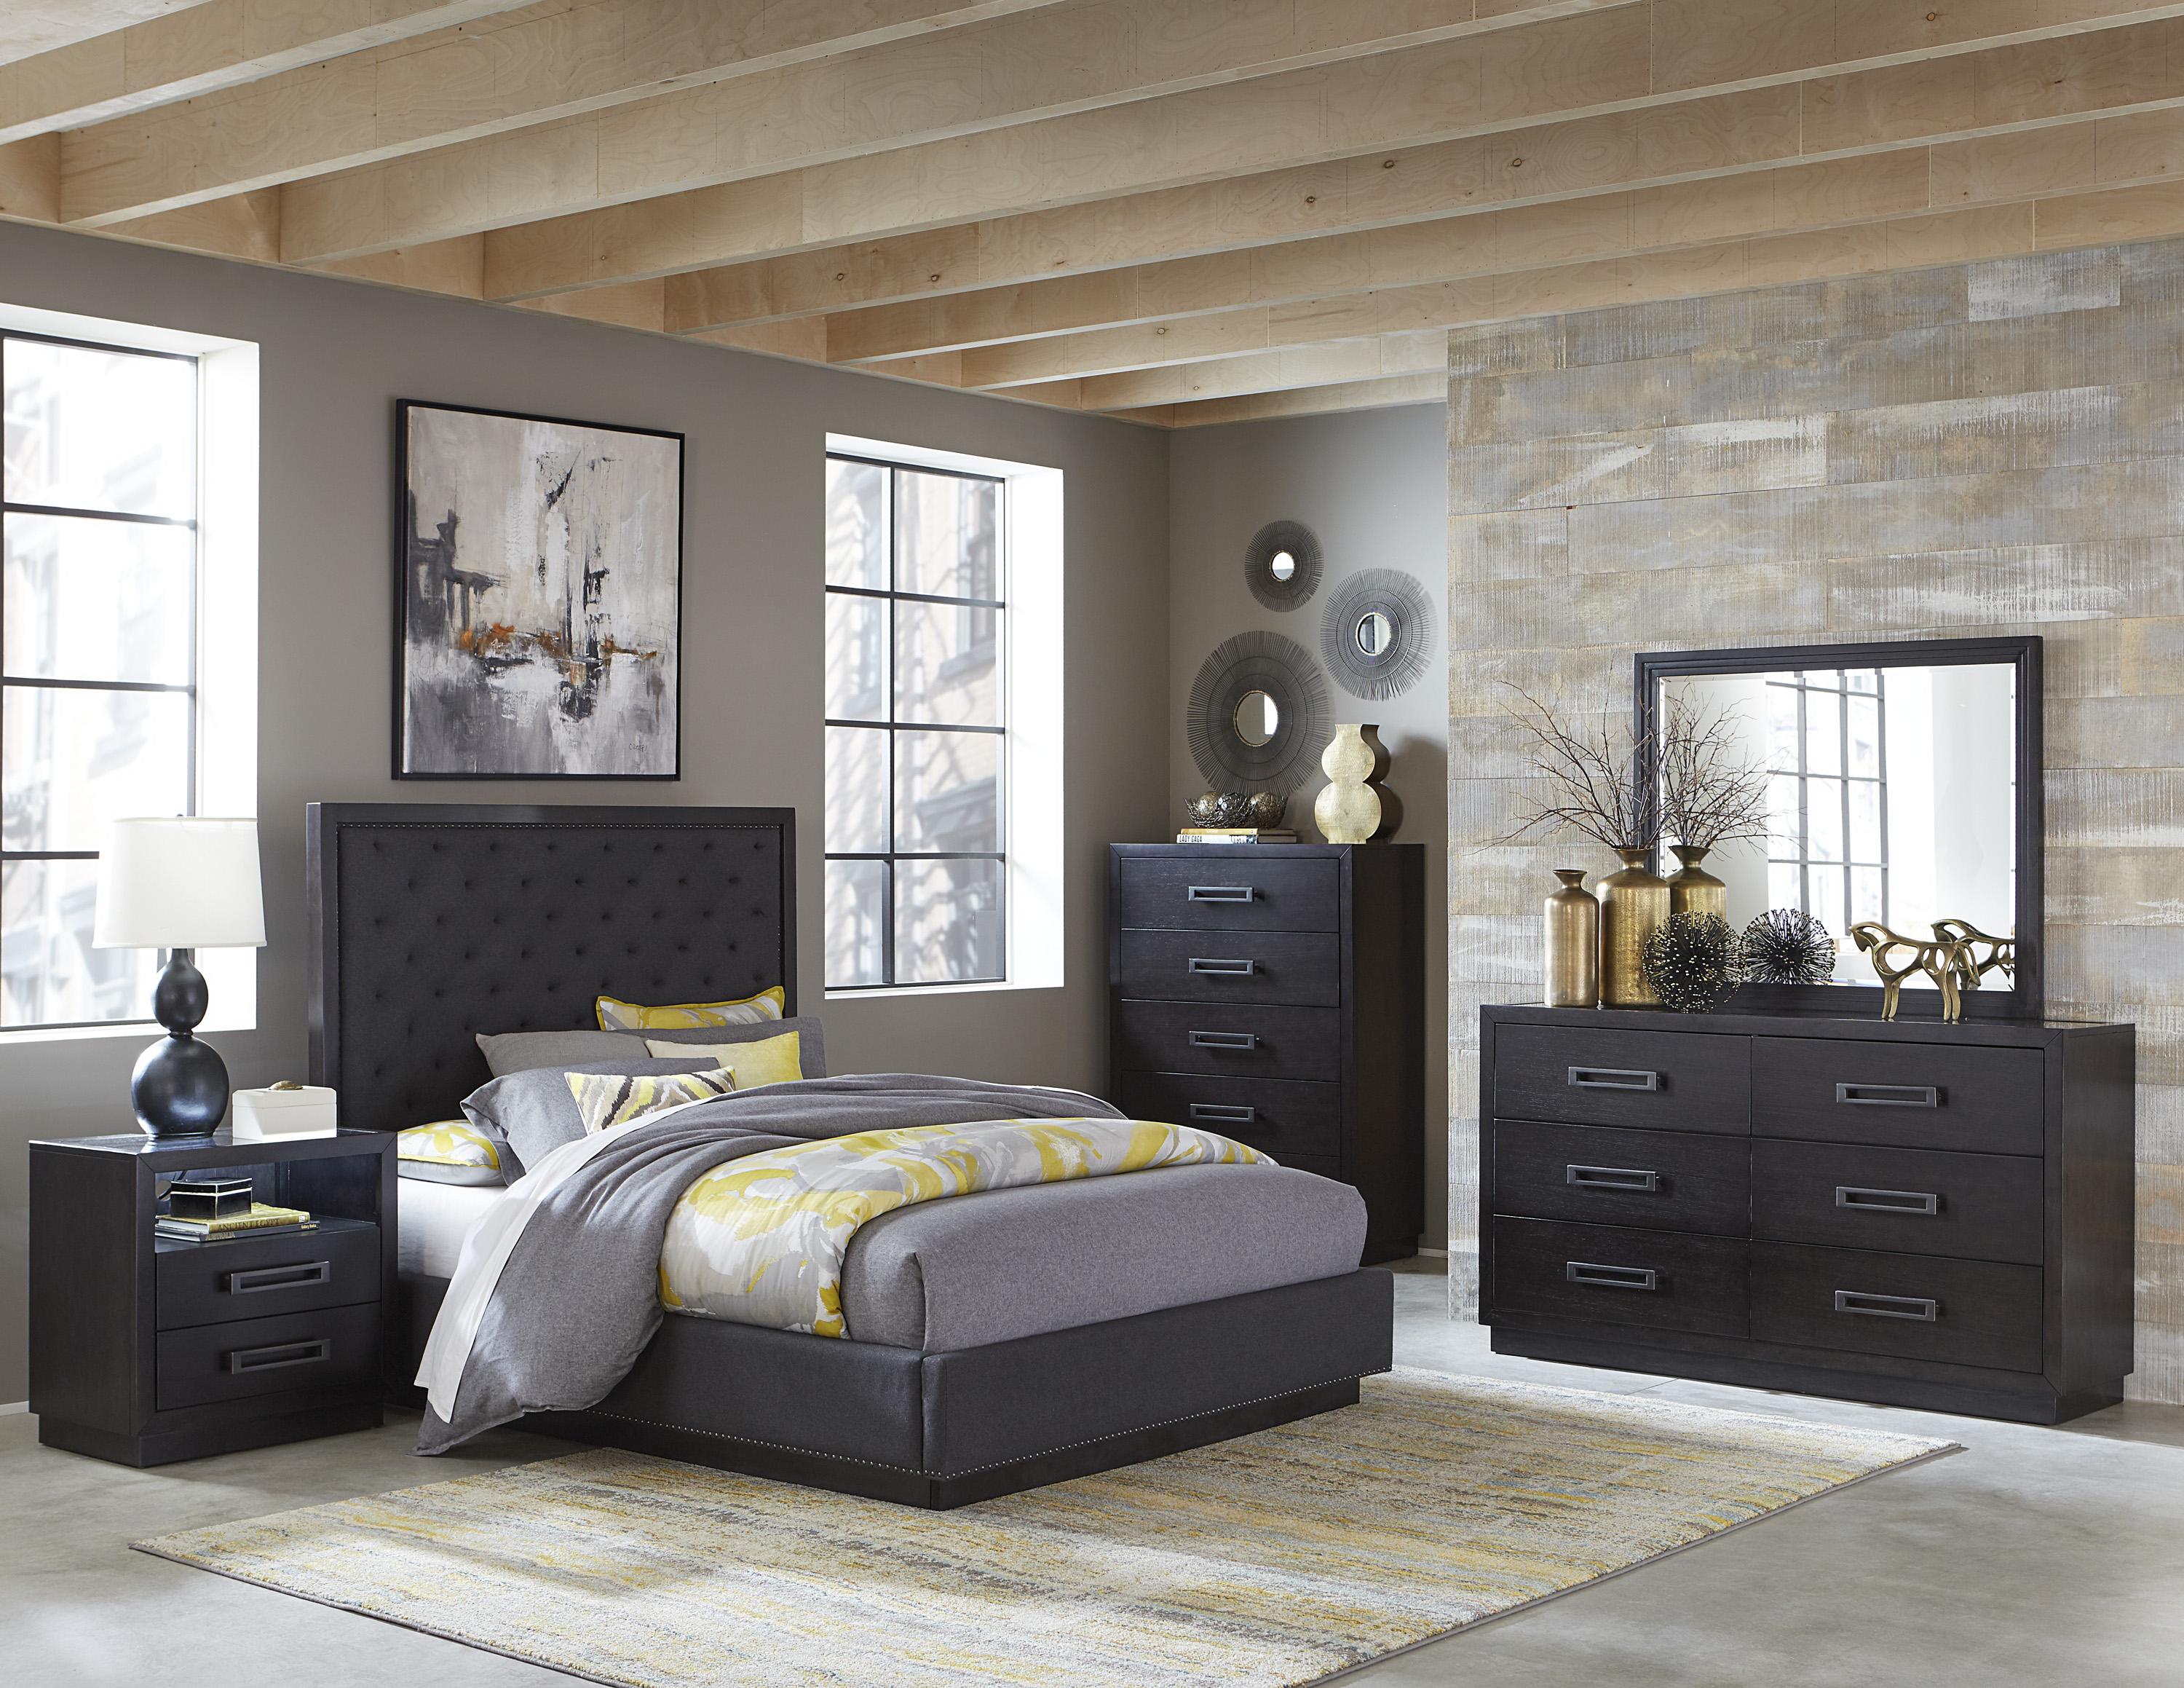 Modern Bedroom Set 5424K-1CK-6PC Larchmont 5424K-1CK-6PC in Charcoal Polyester